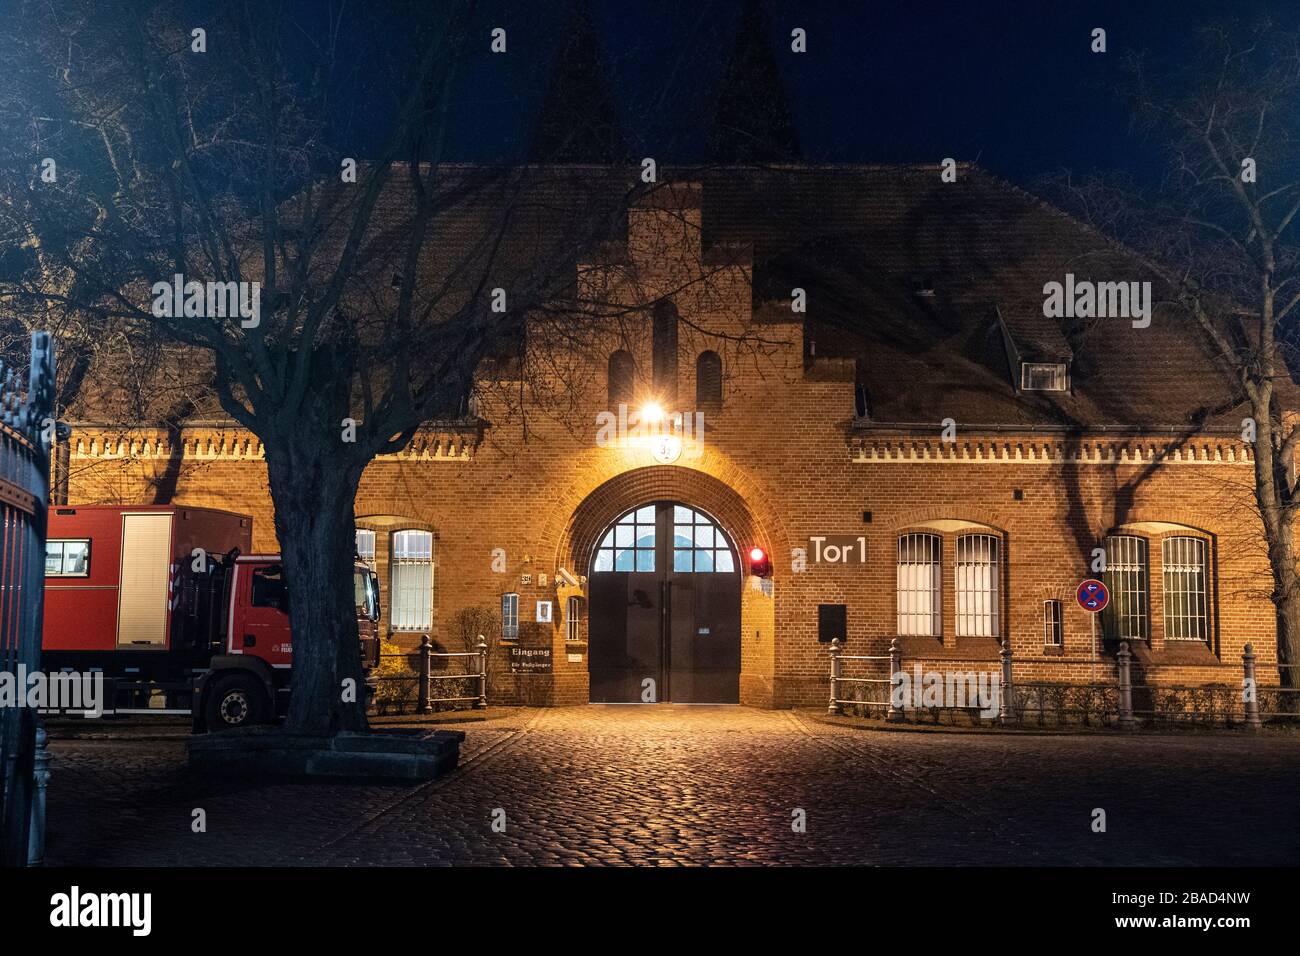 Berlin, Germany. 27th Mar, 2020. The main entrance to the Tegel prison is illuminated. For reasons as yet unknown, a fire broke out in a cell wing there early in the morning. One person was killed. Credit: Paul Zinken/dpa-zb-Zentralbild/dpa/Alamy Live News Stock Photo